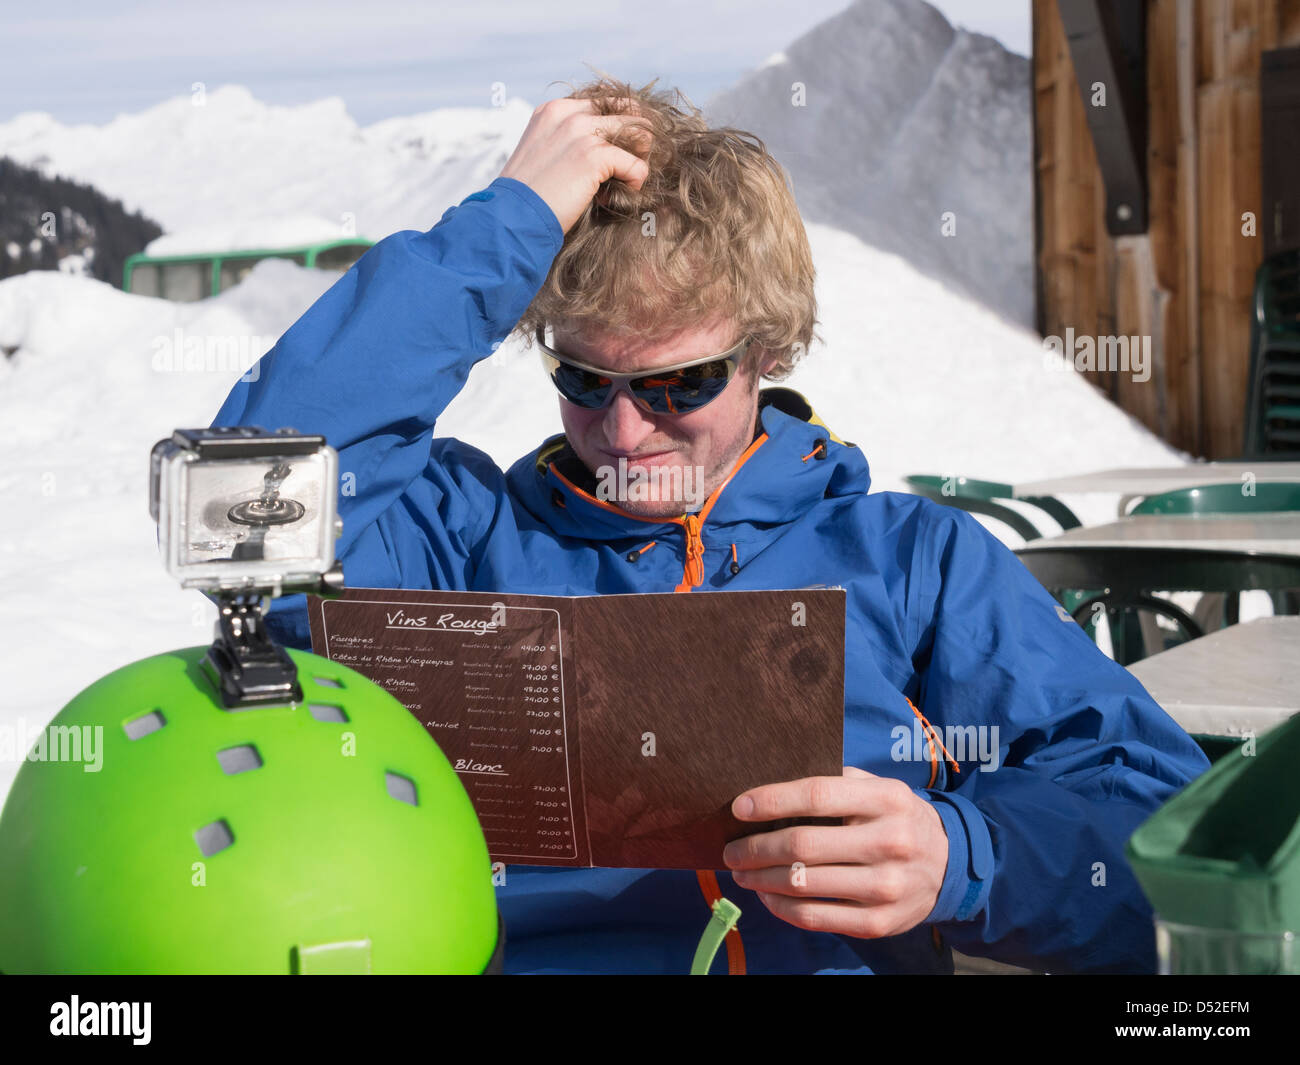 Man scratching his head whilst trying to decide what to eat from a menu in a ski restaurant. Haute Savoie, Rhone-Alpes, France Stock Photo